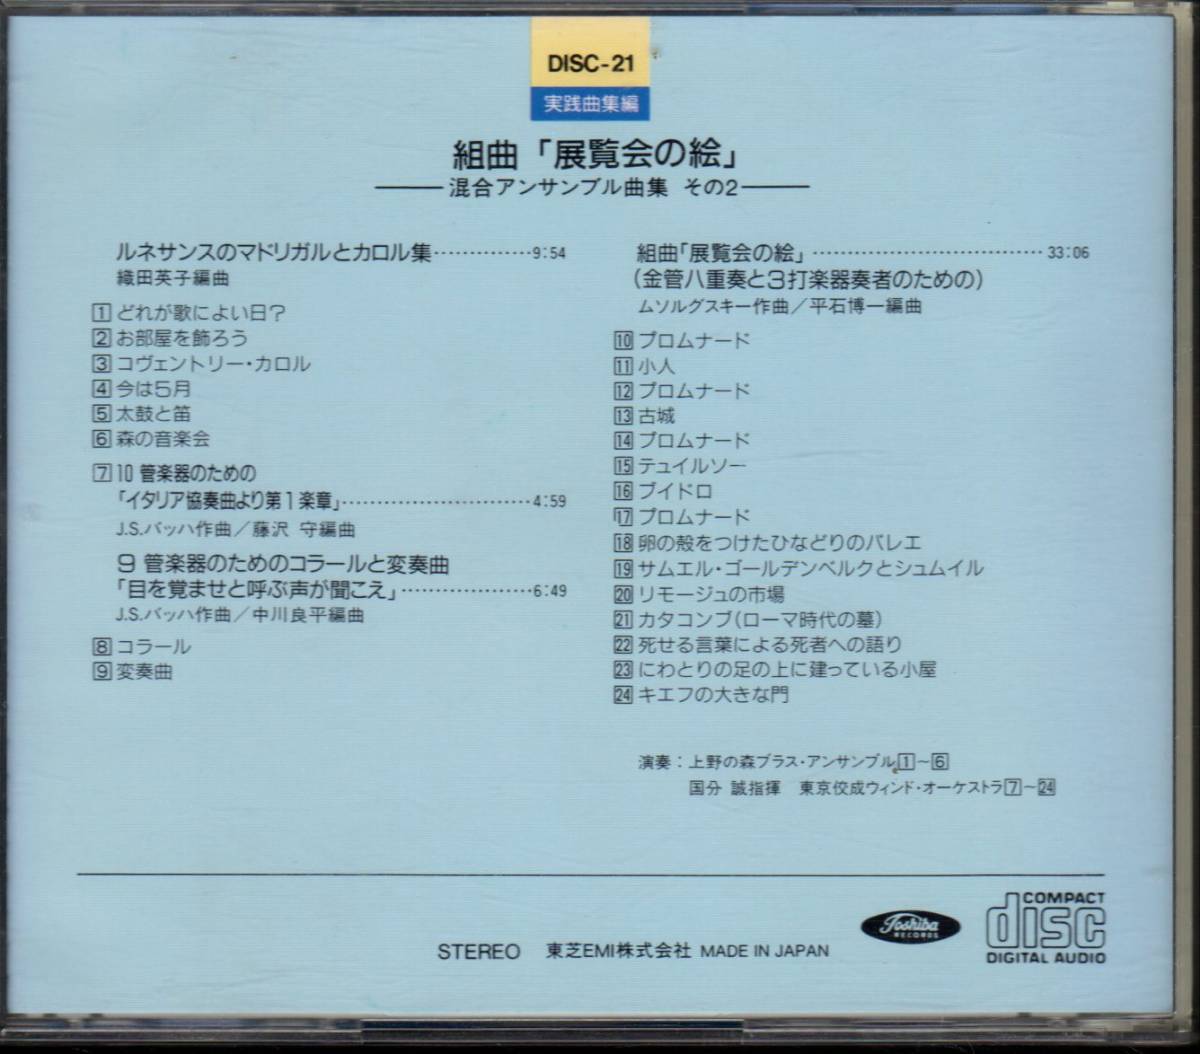  practice ensemble guidance complete set of works /CD20 practice collection compilation Kumikyoku exhibition viewing .. . mixing ensemble collection that 2/ eyes ....... voice . hear / records out of production 